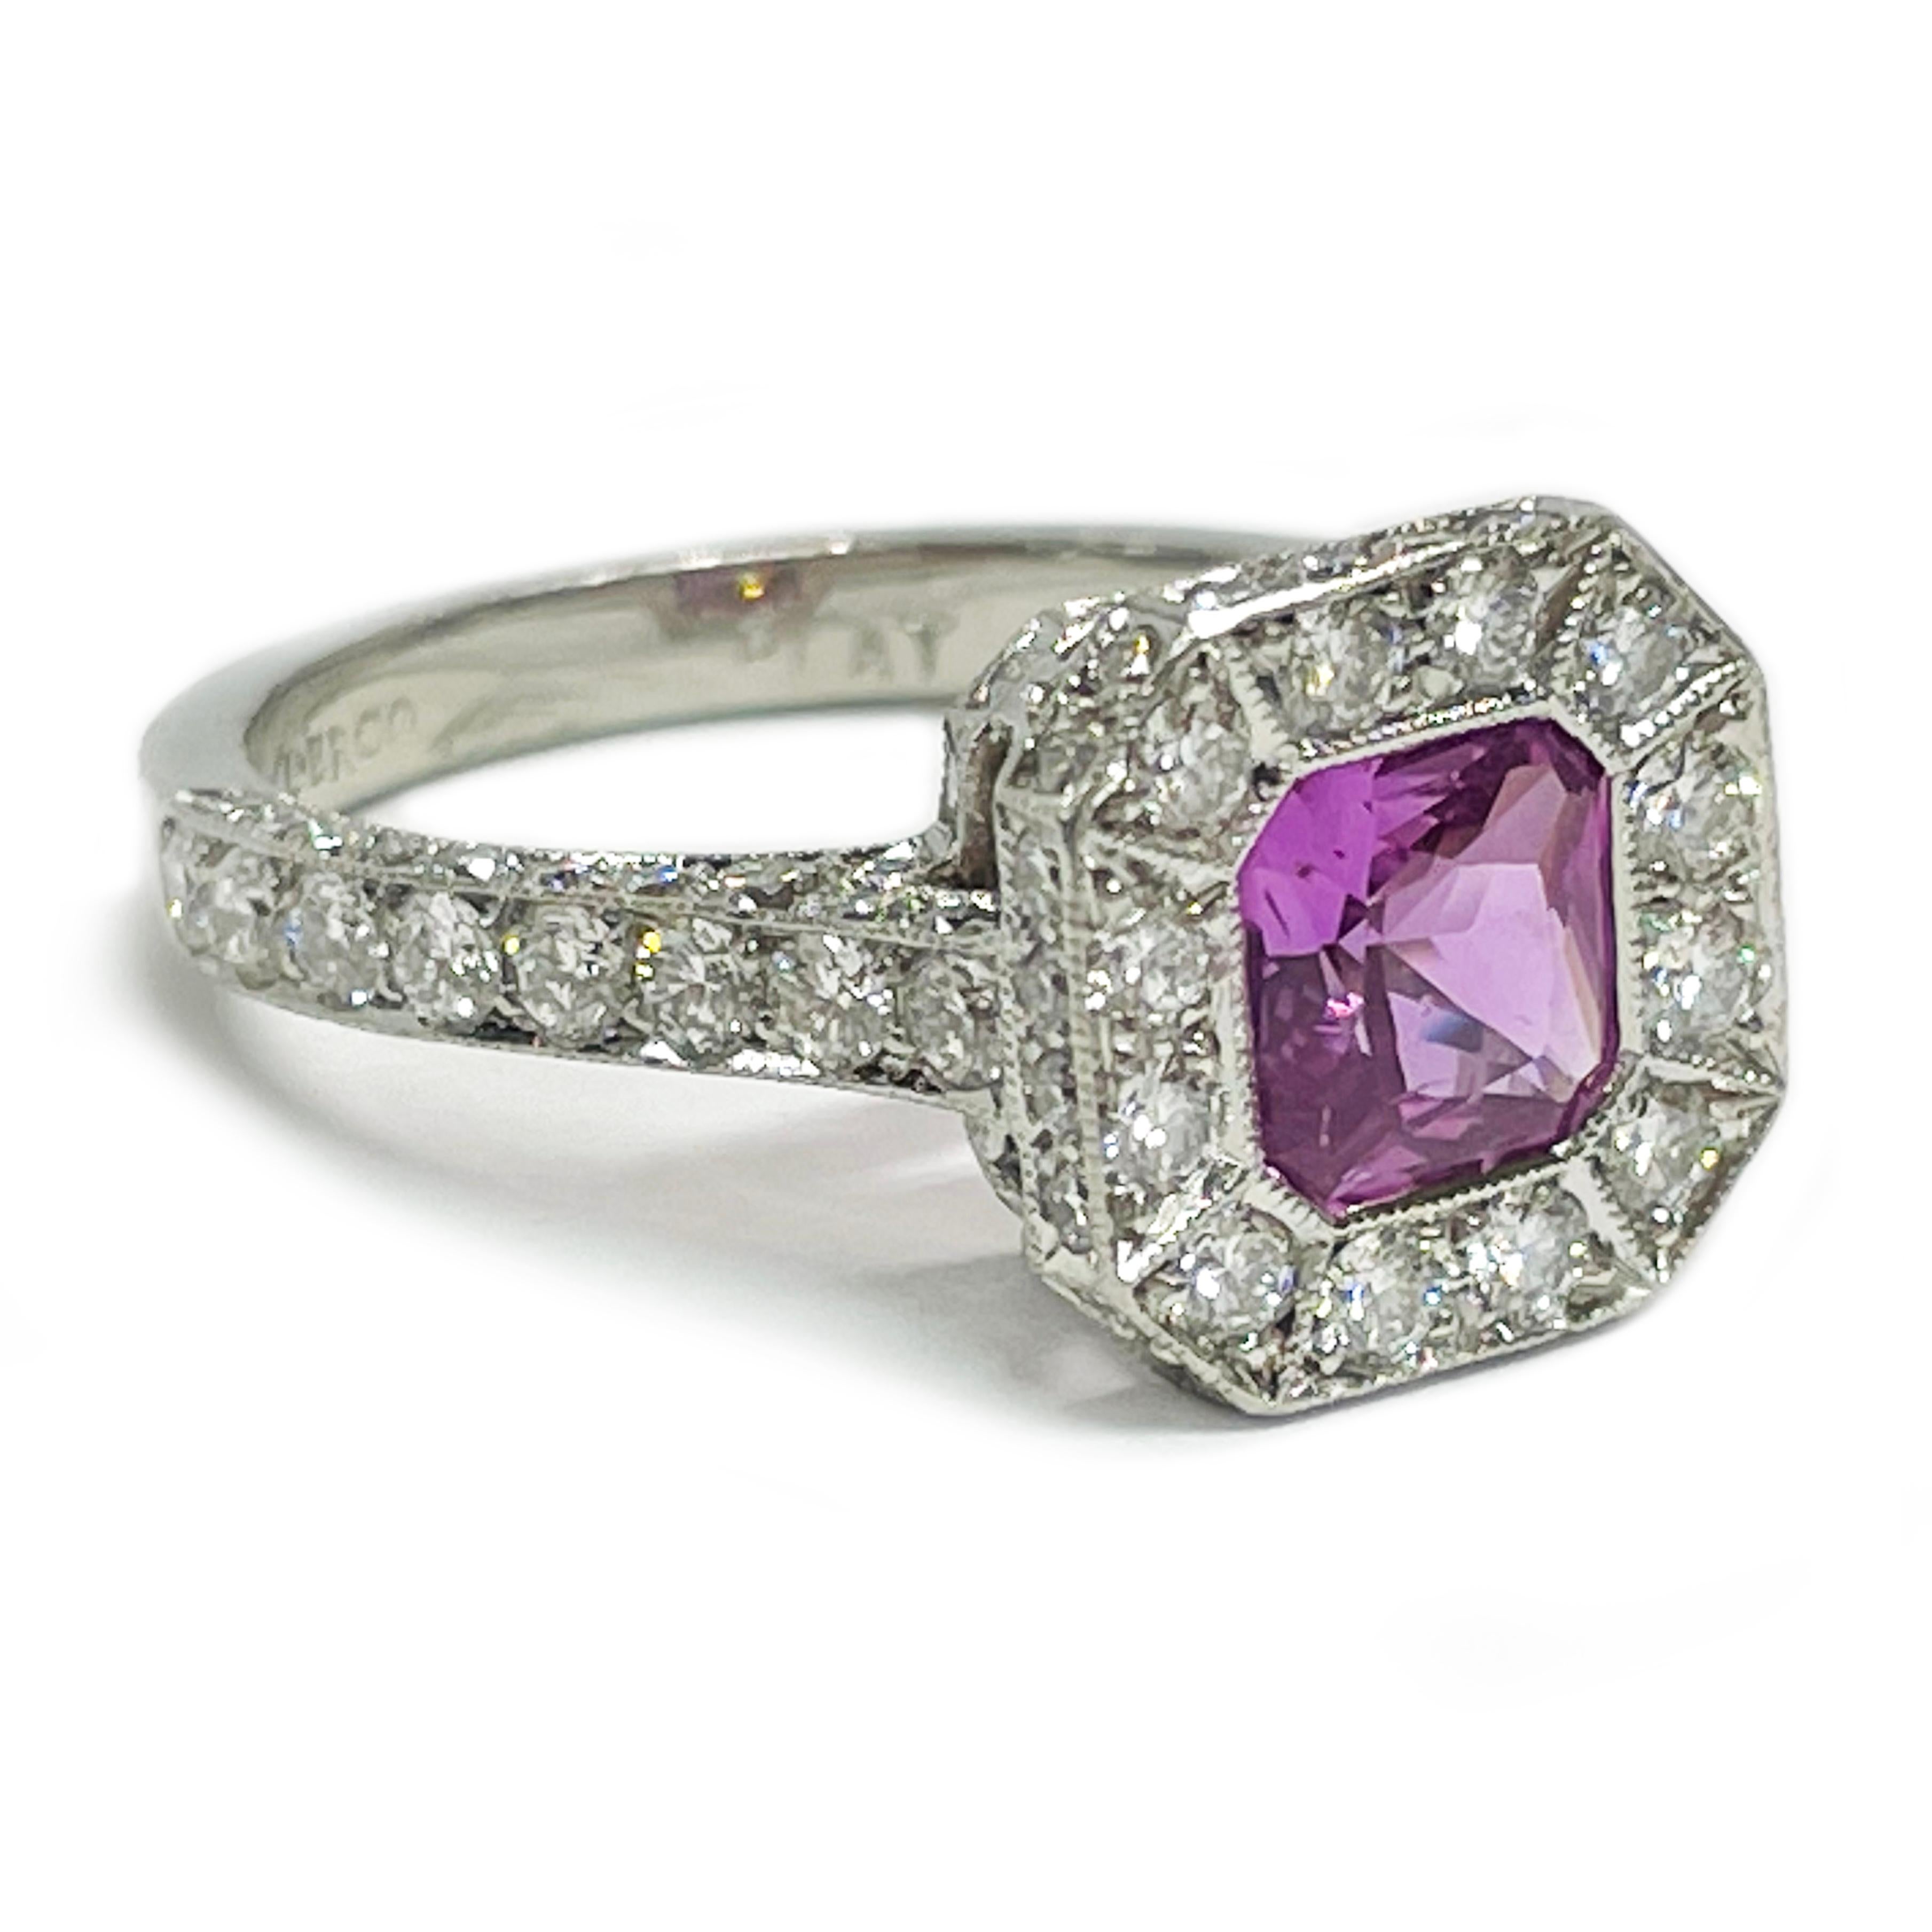 Platinum Pink Sapphire Diamond Ring. The ring features a princess-cut pink sapphire with a micro-melee design with diamonds set in the top and sides of the bezel and shank with milgrain detail. The bead-set round diamonds continue along the bottom